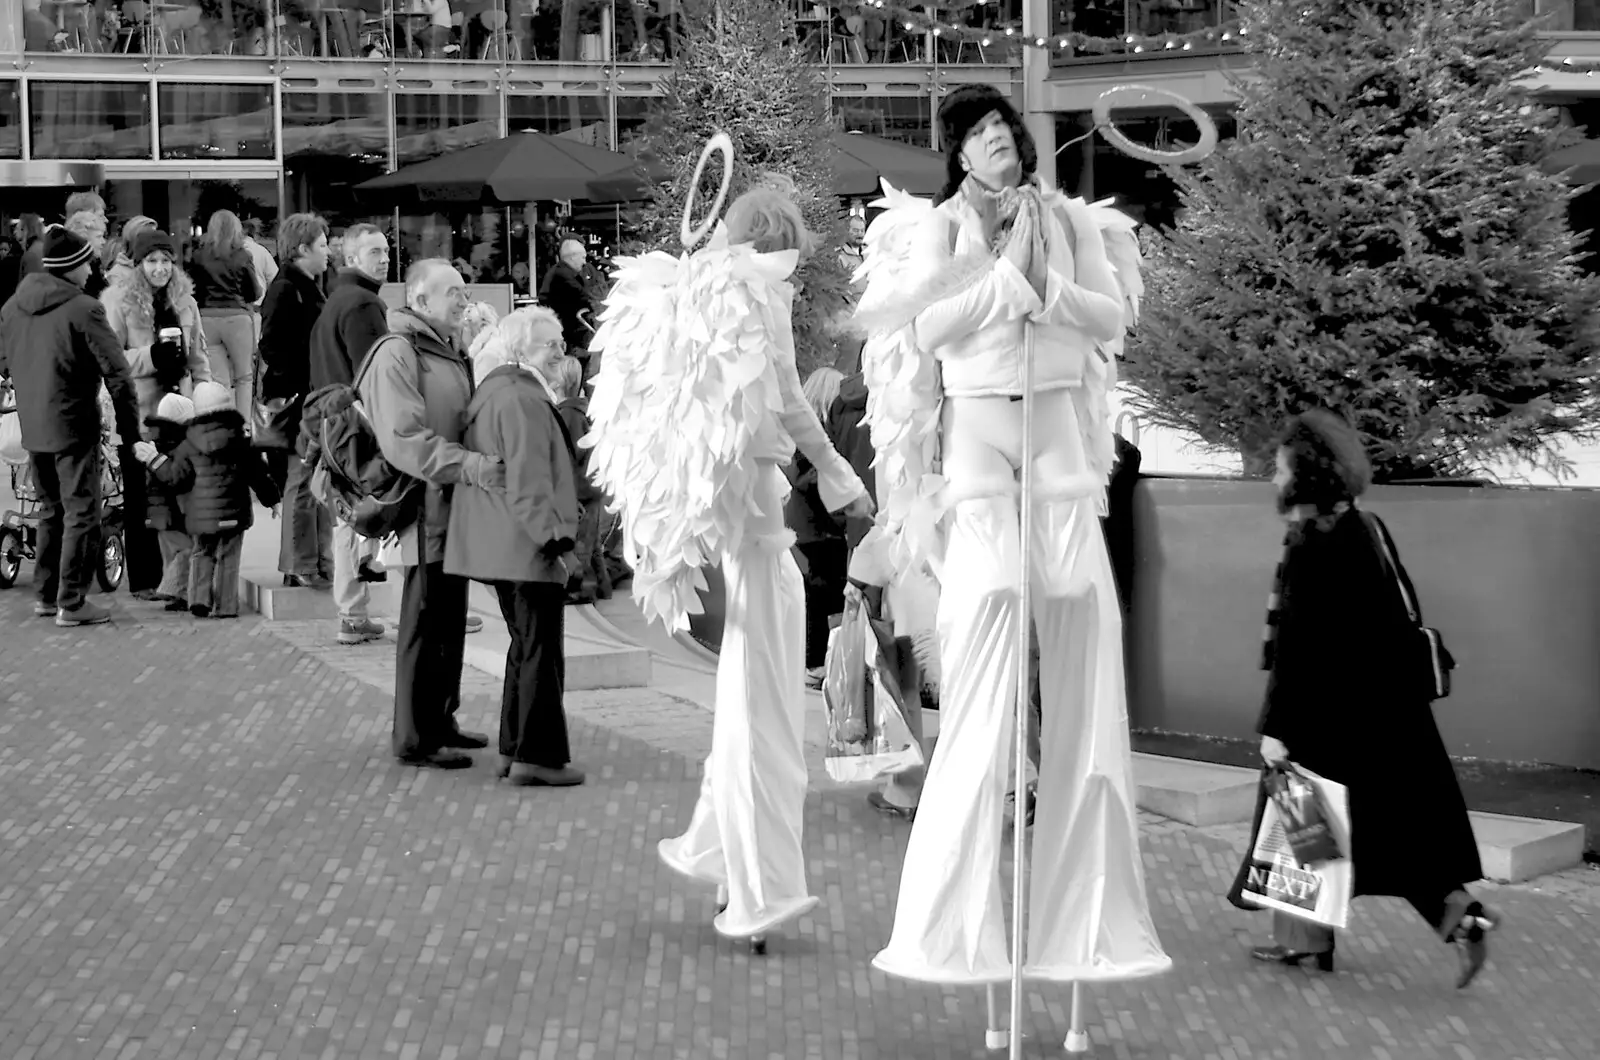 Another prayer from a stilted angel, from Christmas Shopping and a Carol Service, Norwich and Thrandeston - 19th December 2004